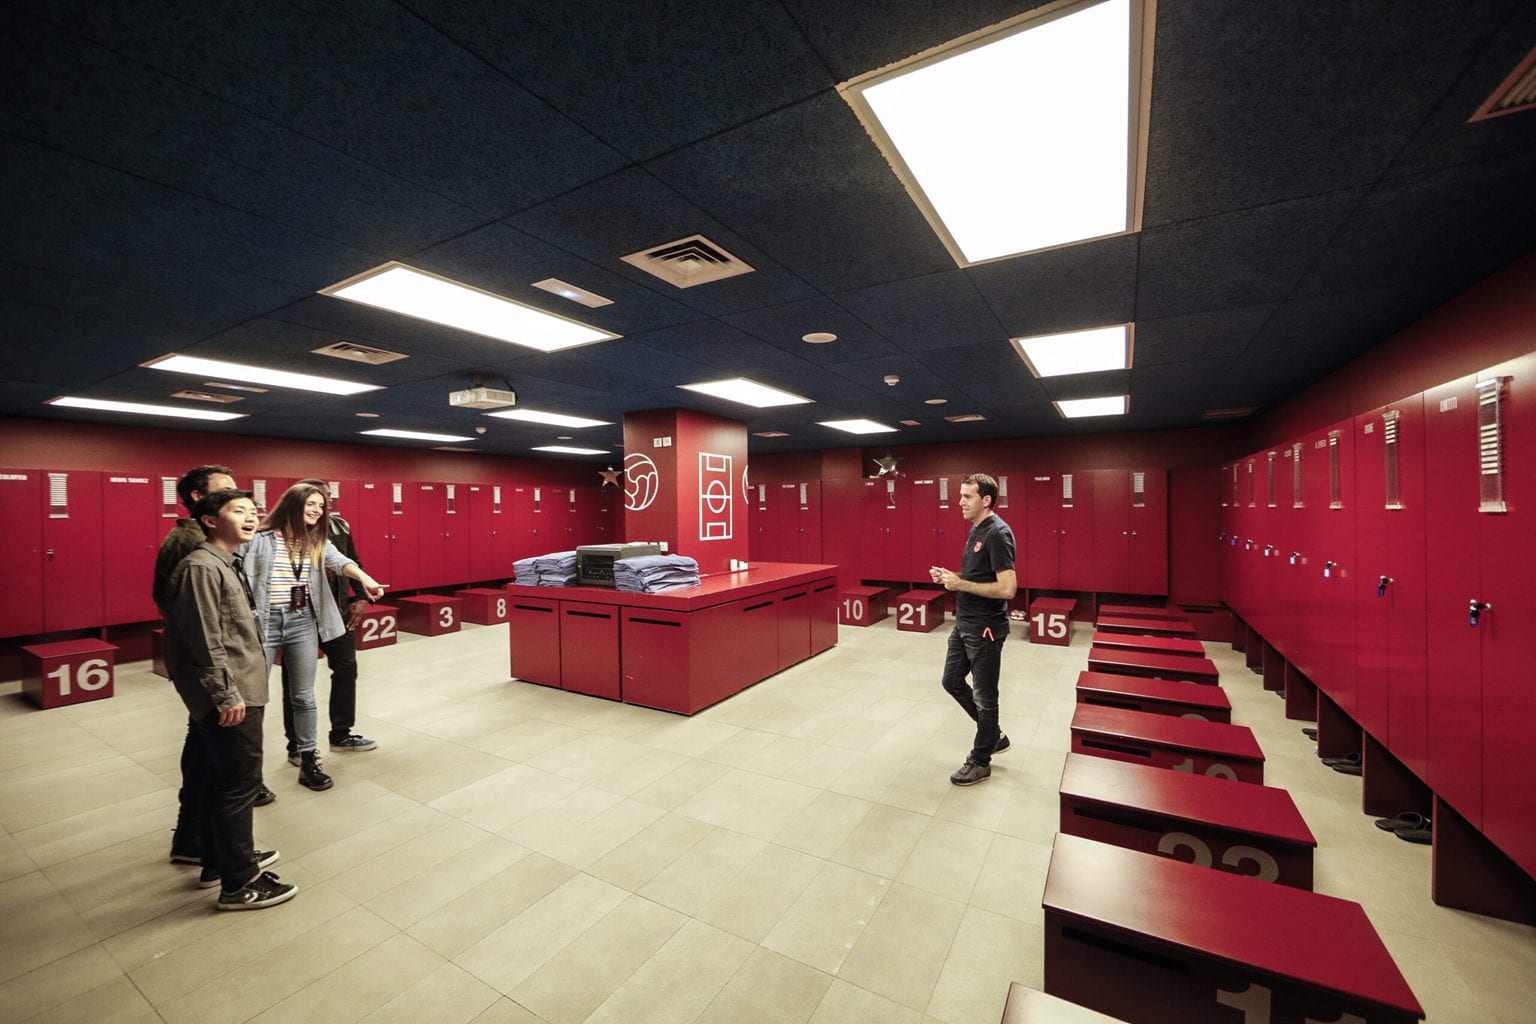 FC Barcelona changing rooms